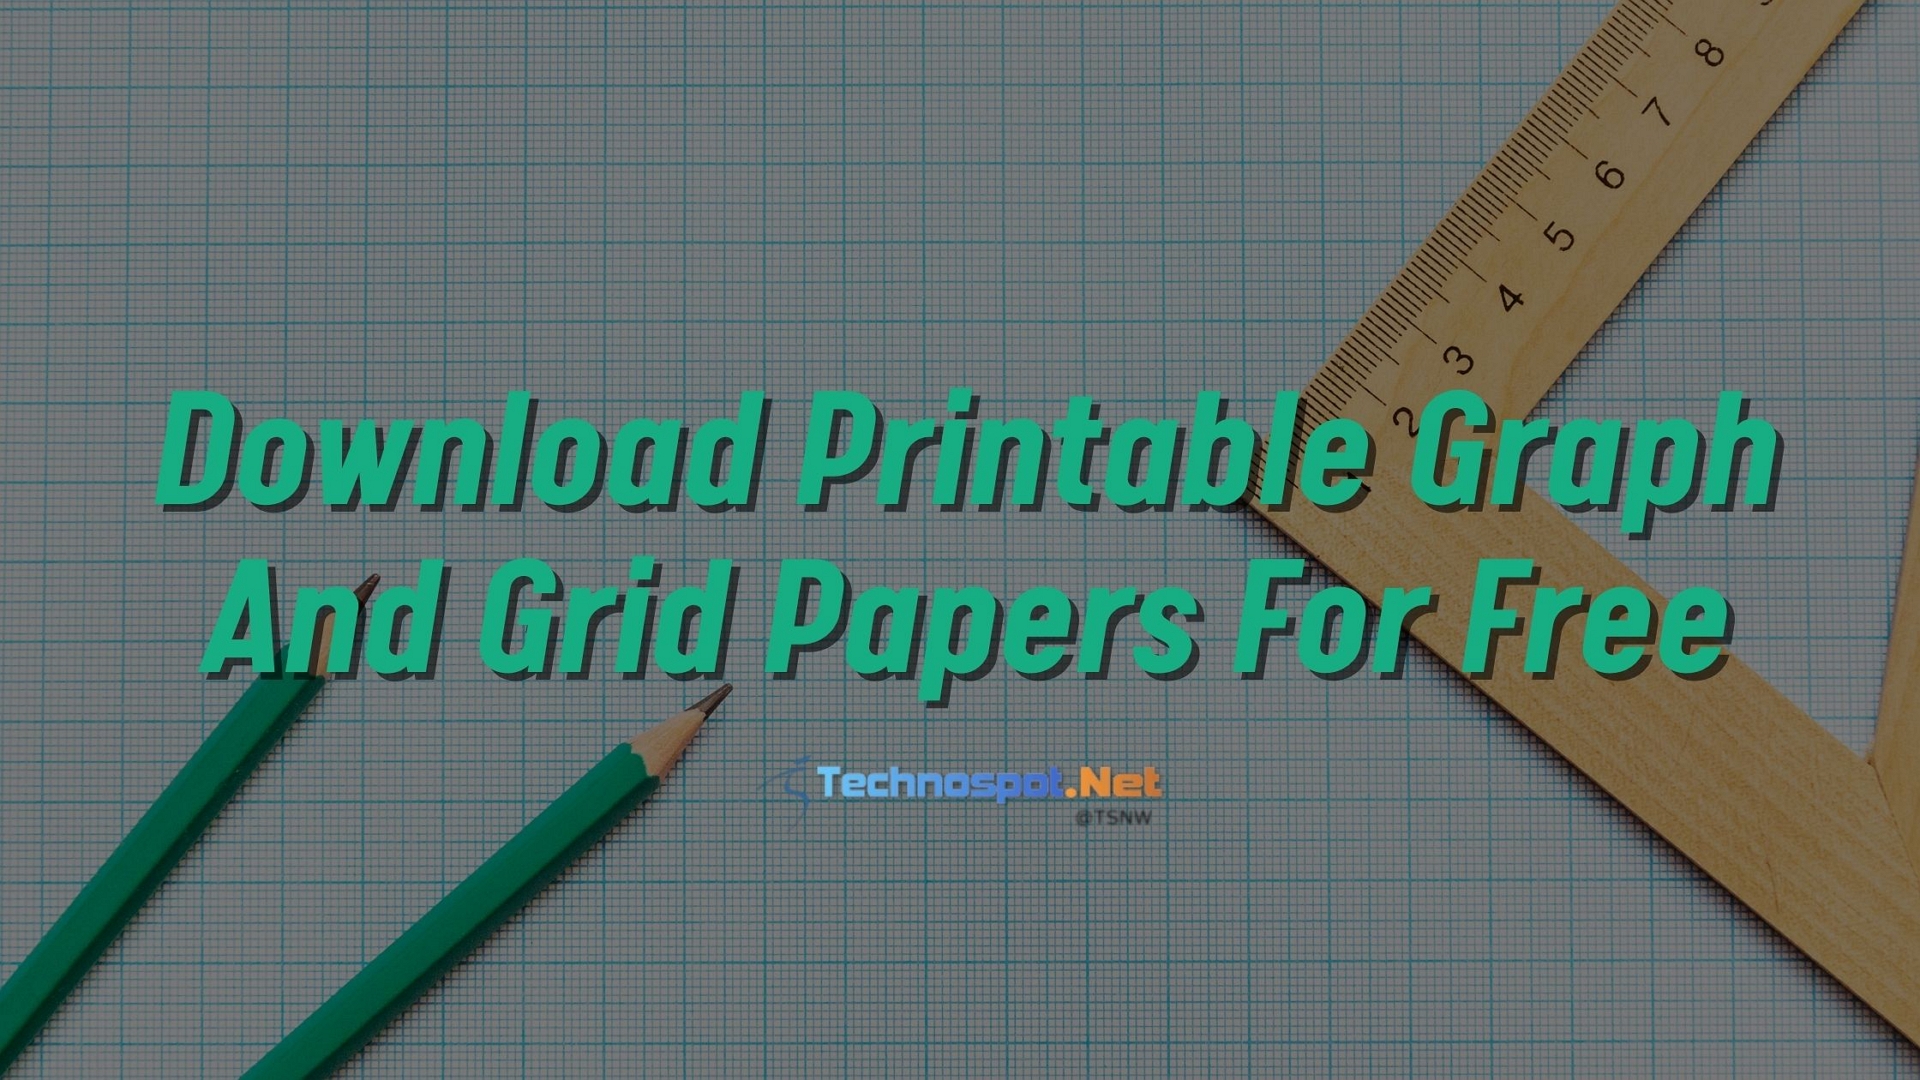 free download graph and grid papers in pdf format